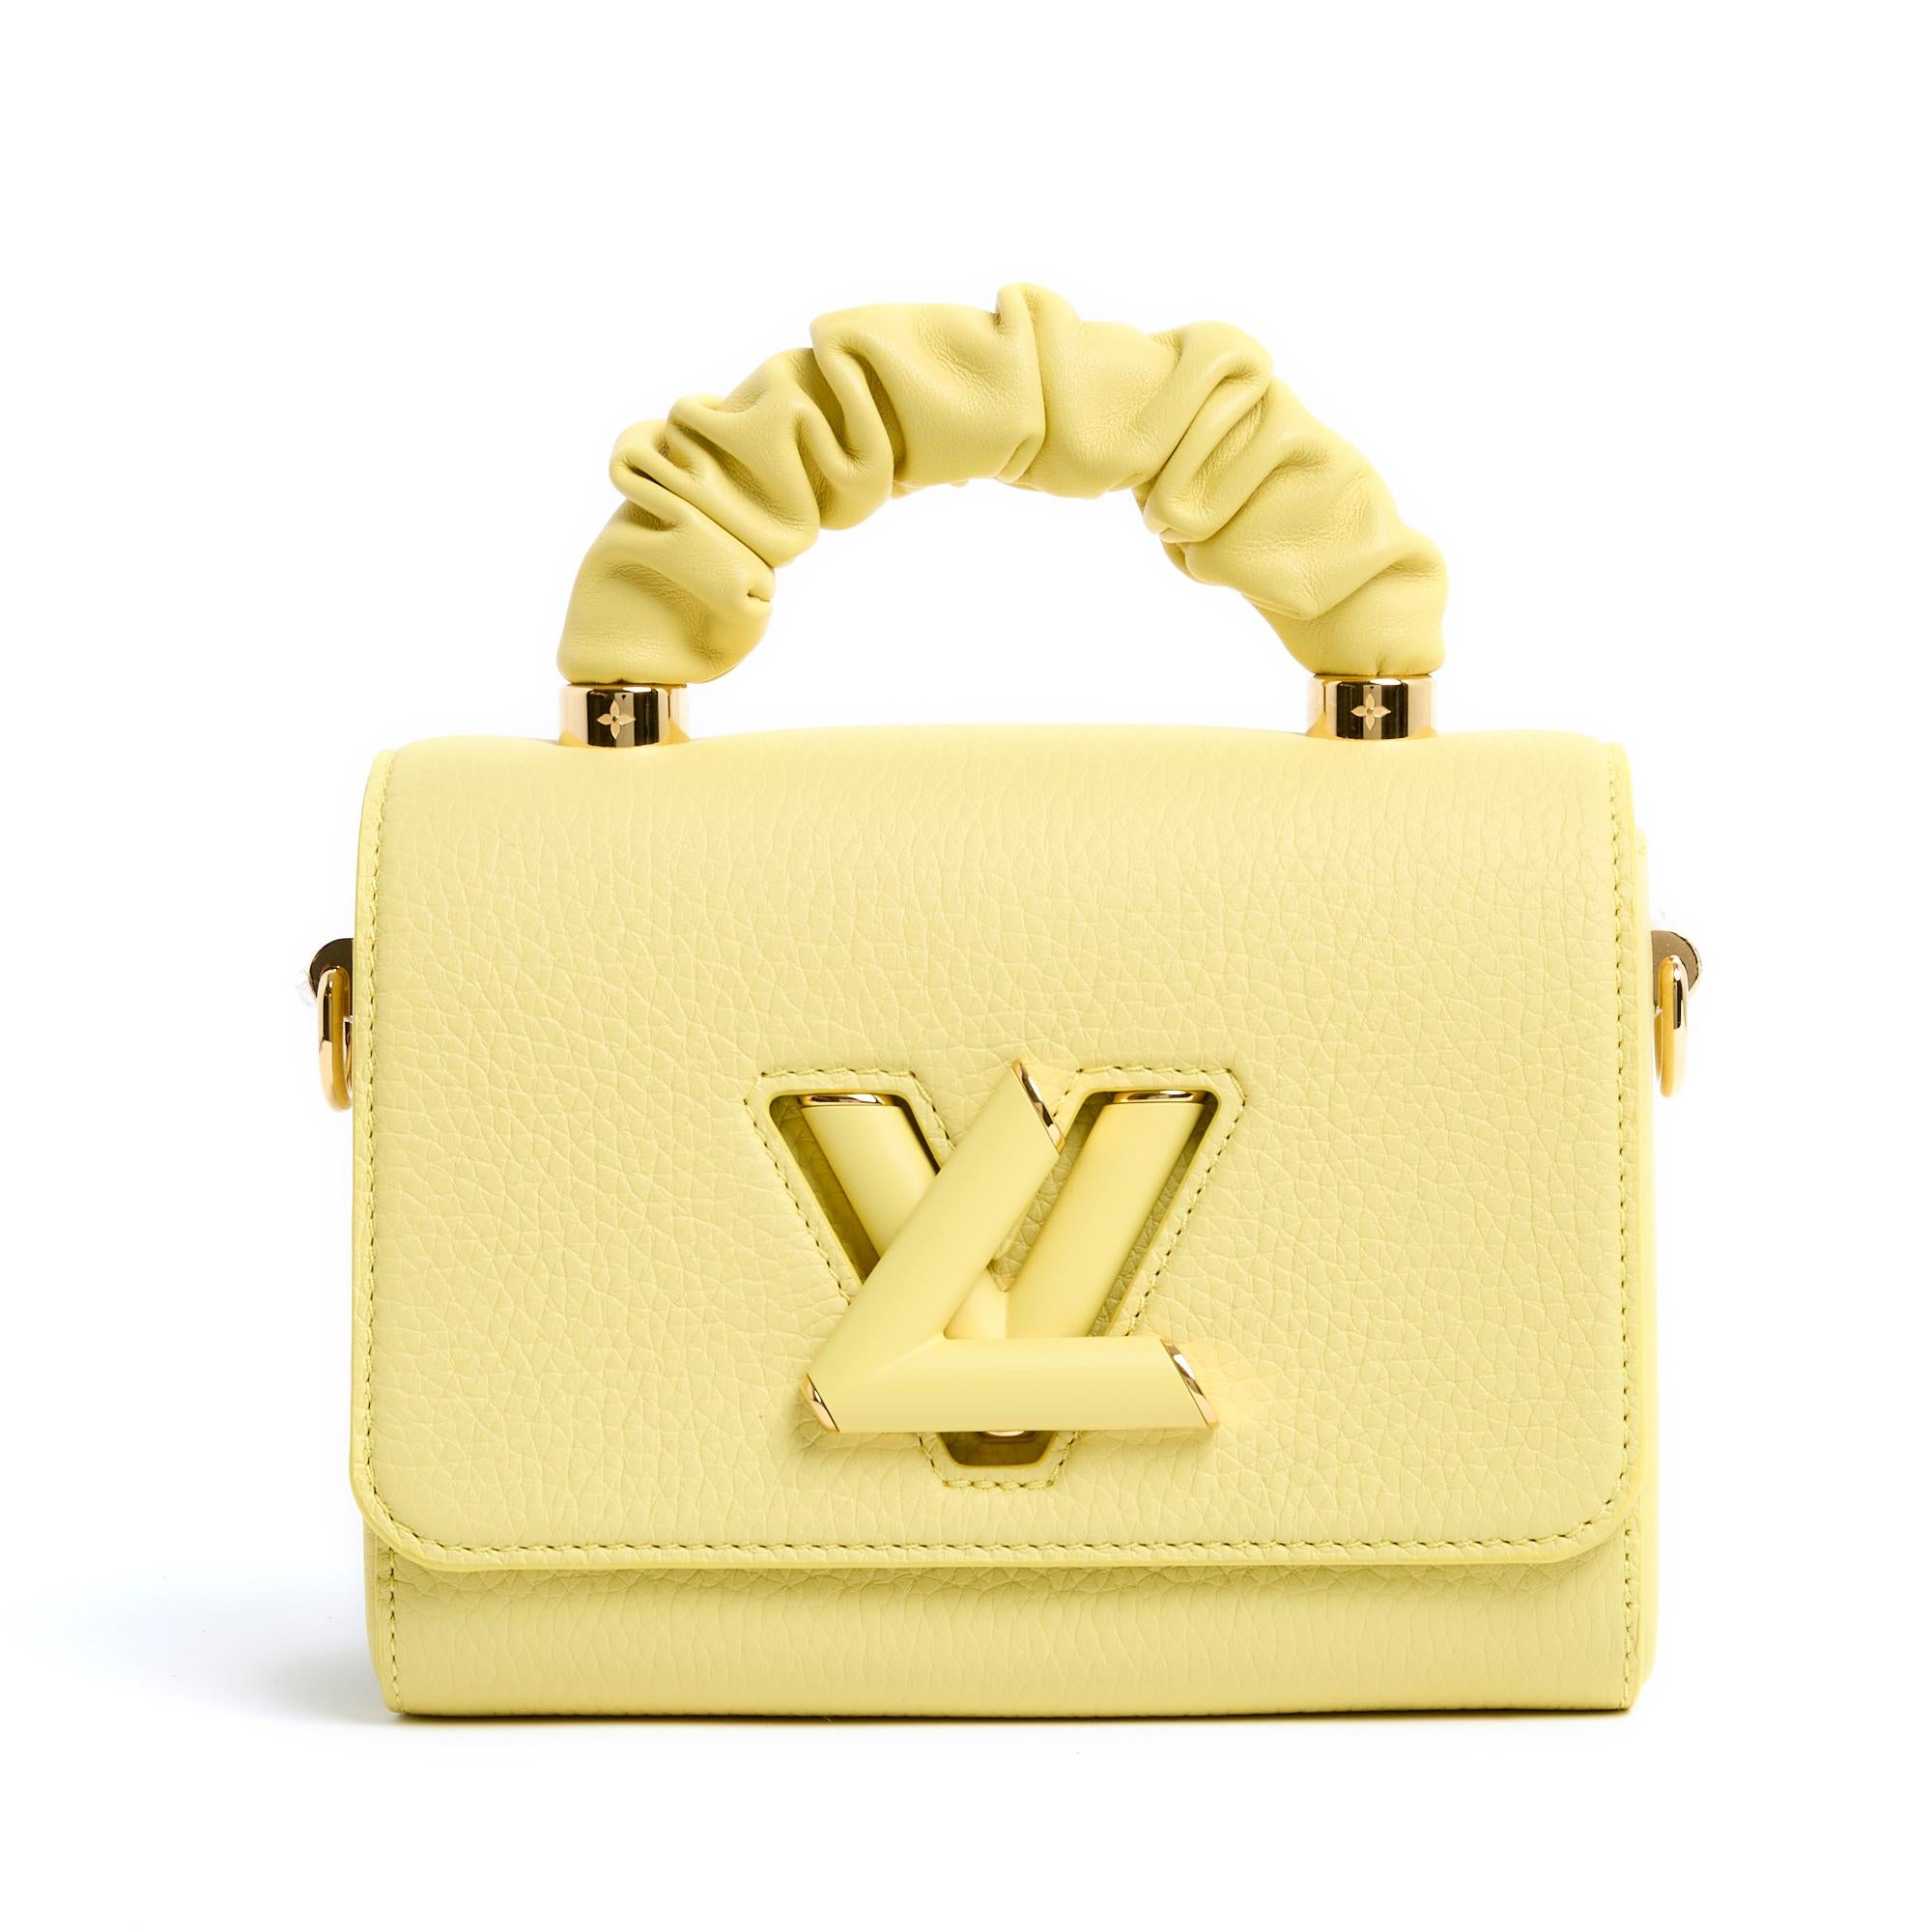 Louis Vuitton Twist Handle model PM size bag in yellow grained leather, interior coordinated with a patch pocket, swivel clasp with the brand logo in gold metal, leather-covered handle for carrying in the hand, adjustable and removable shoulder